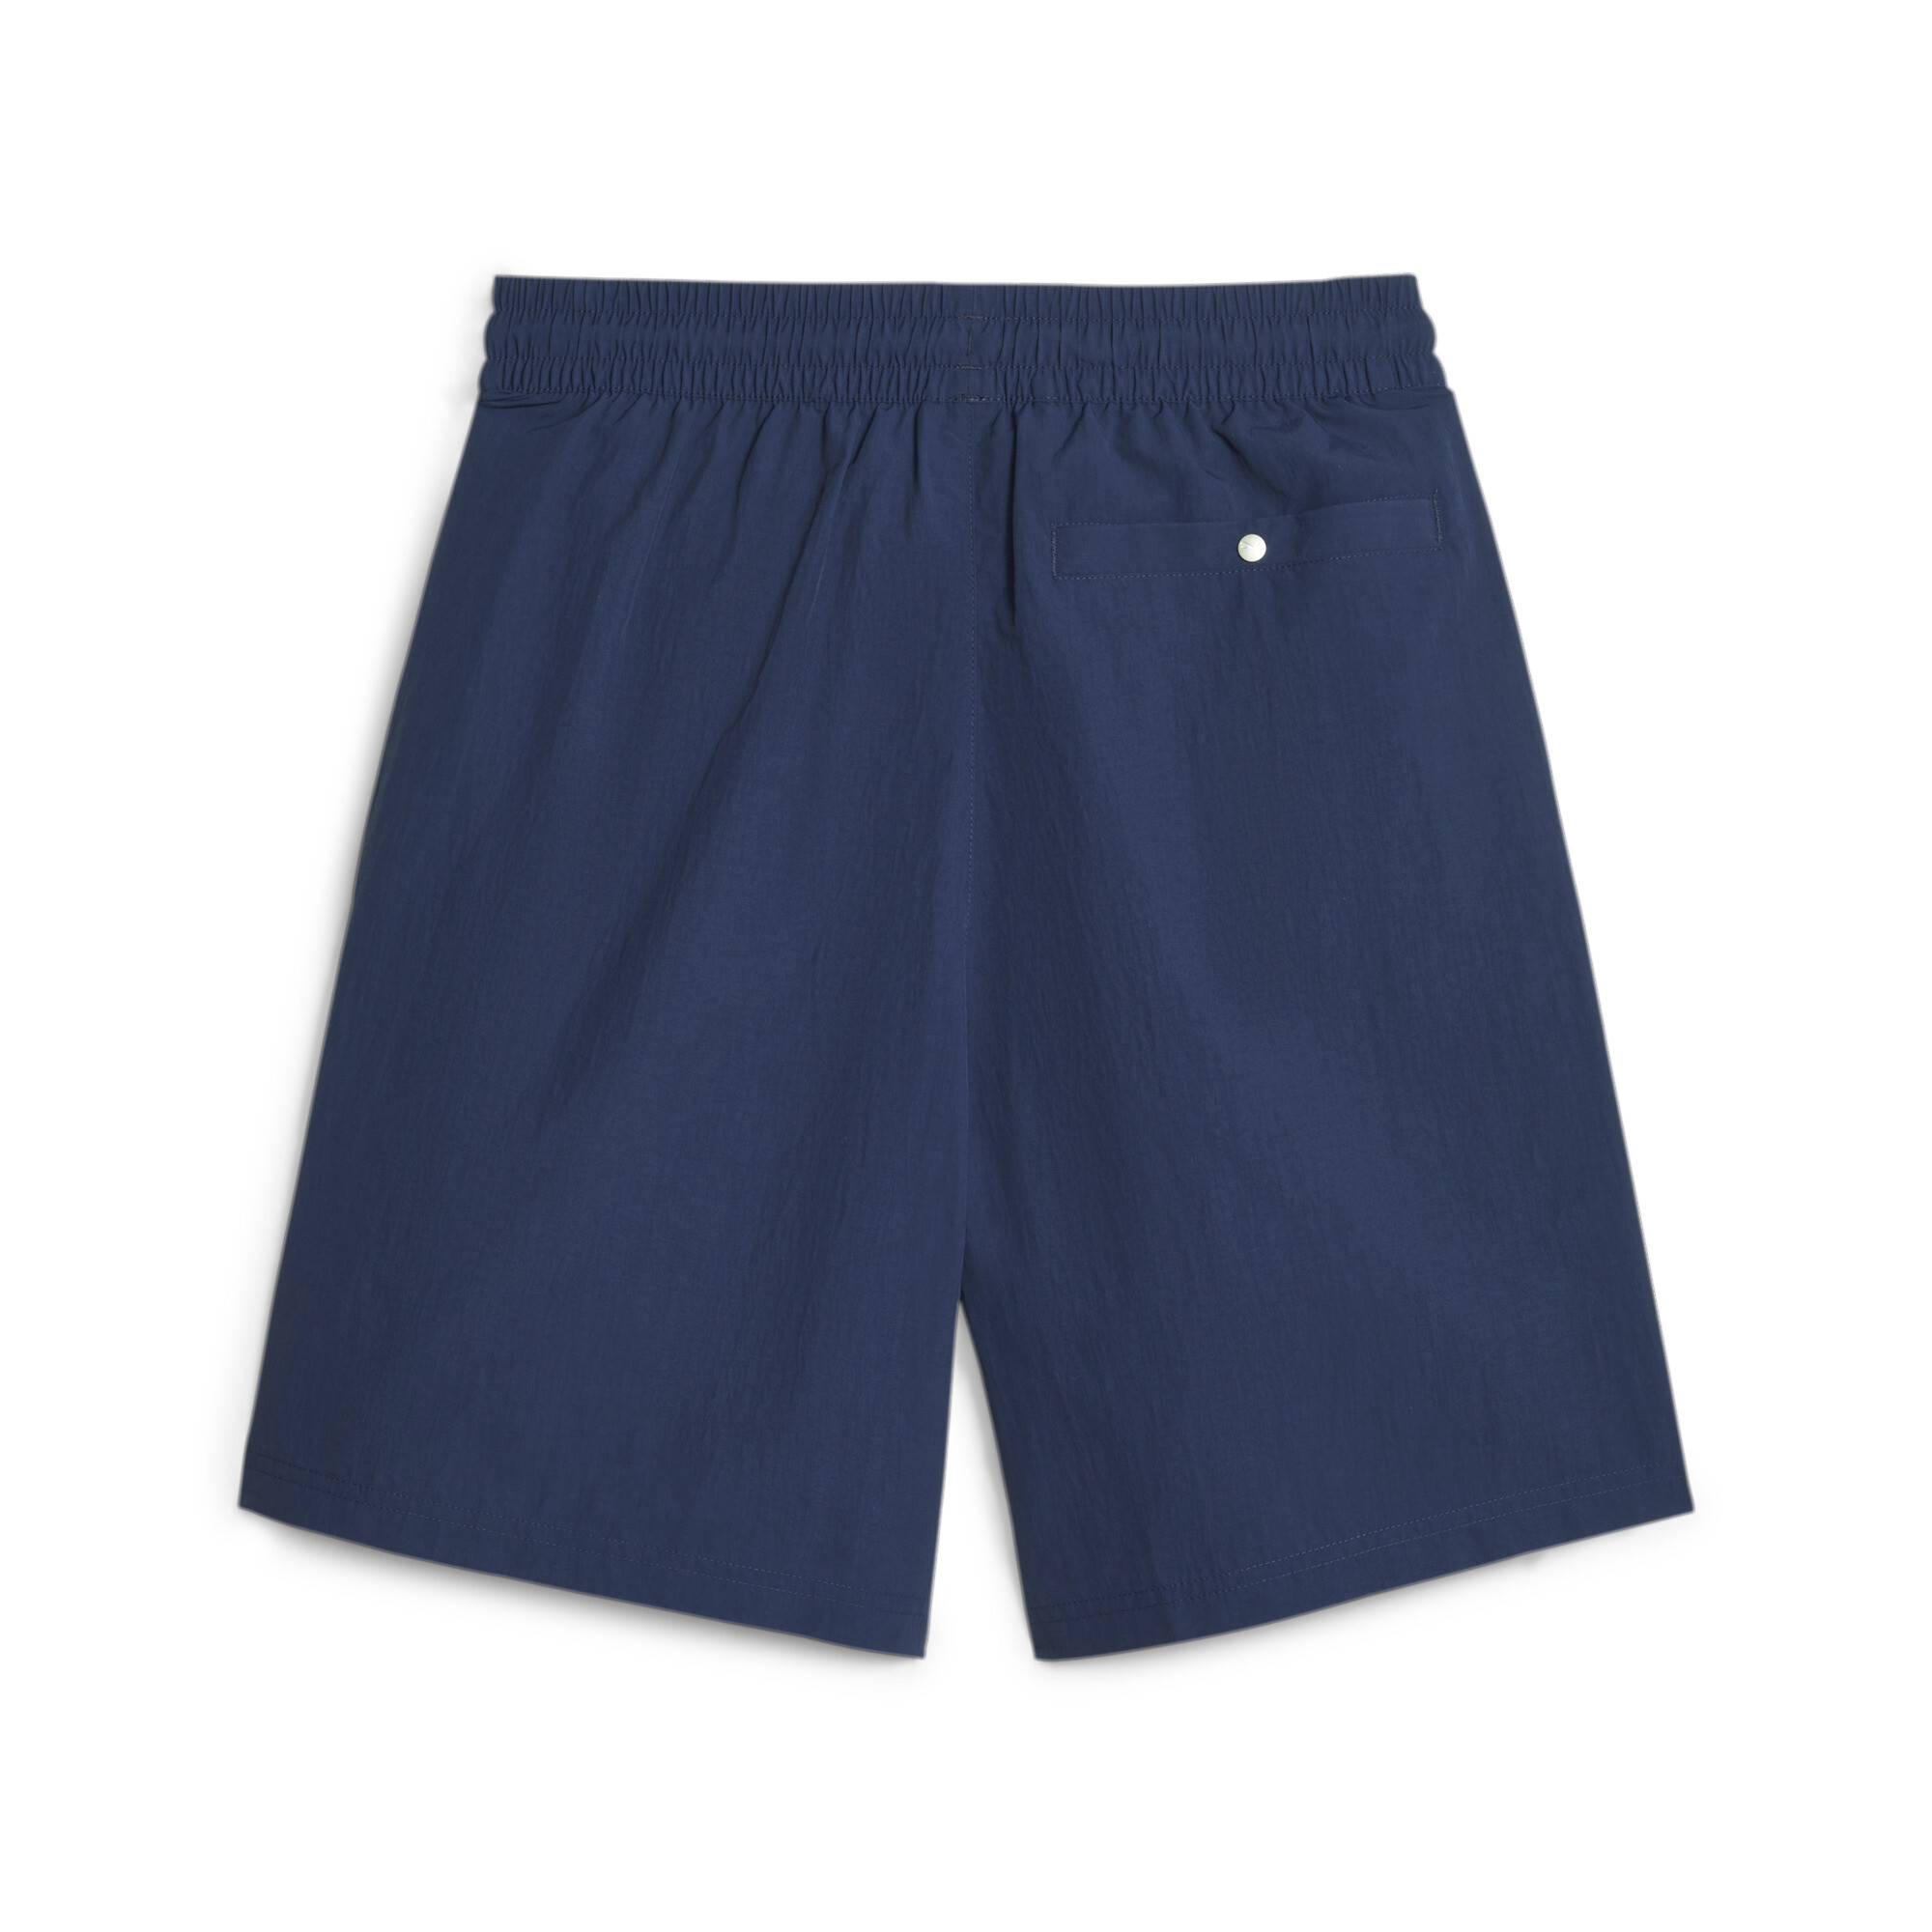 Men's PUMA TEAM Relaxed Shorts In Blue, Size Small